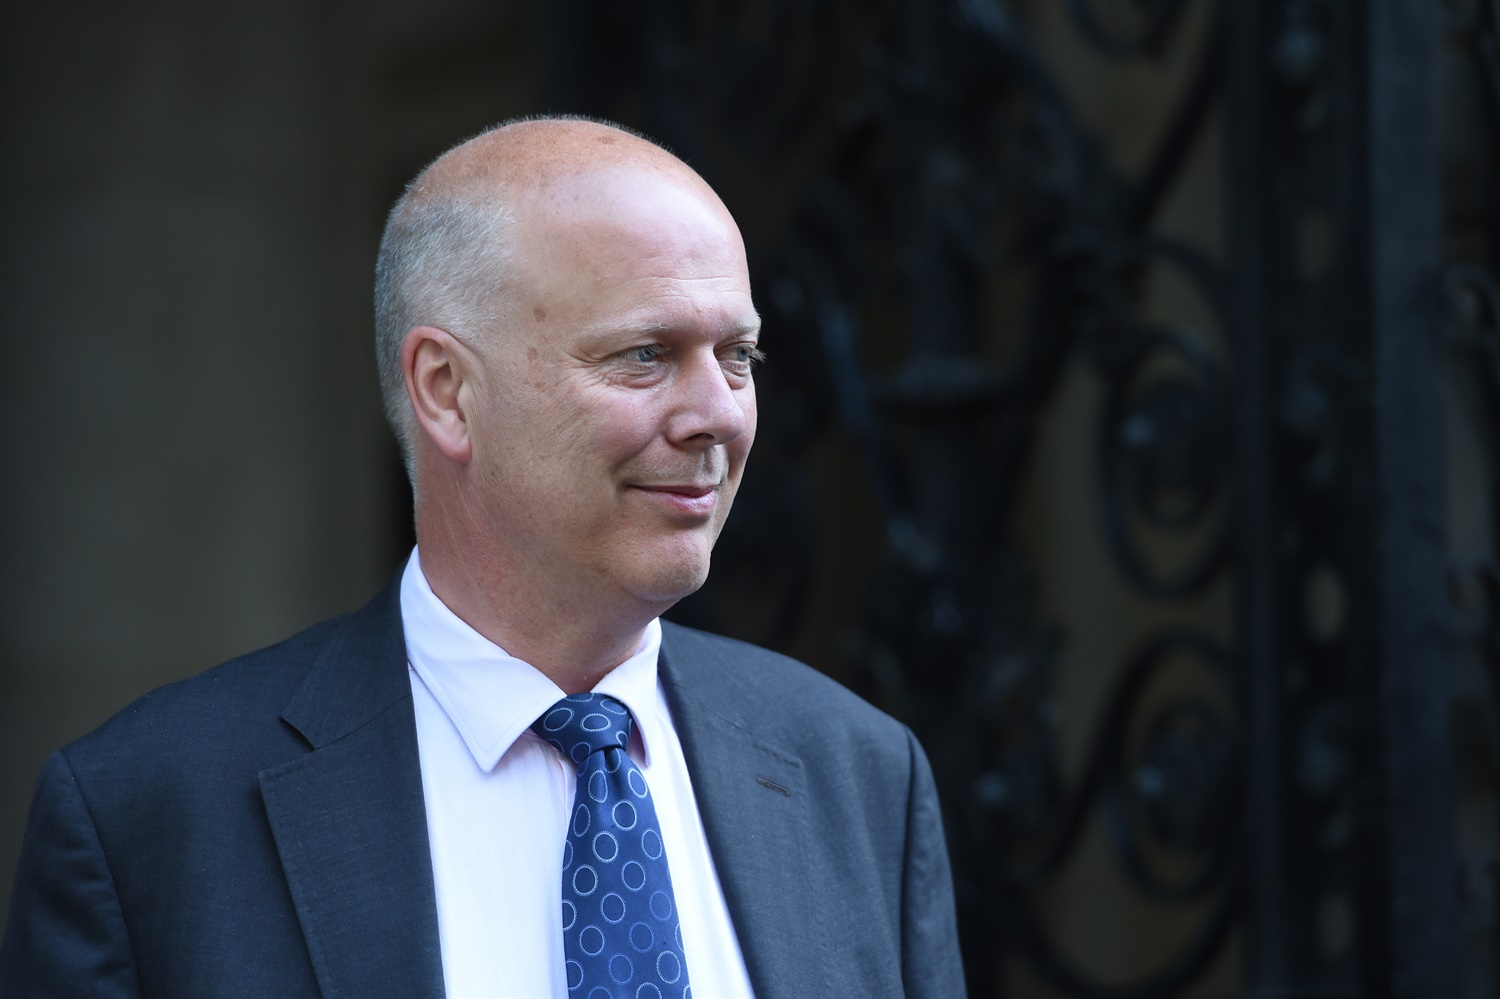 Grayling commits £5m to install digital signalling on TransPennine route